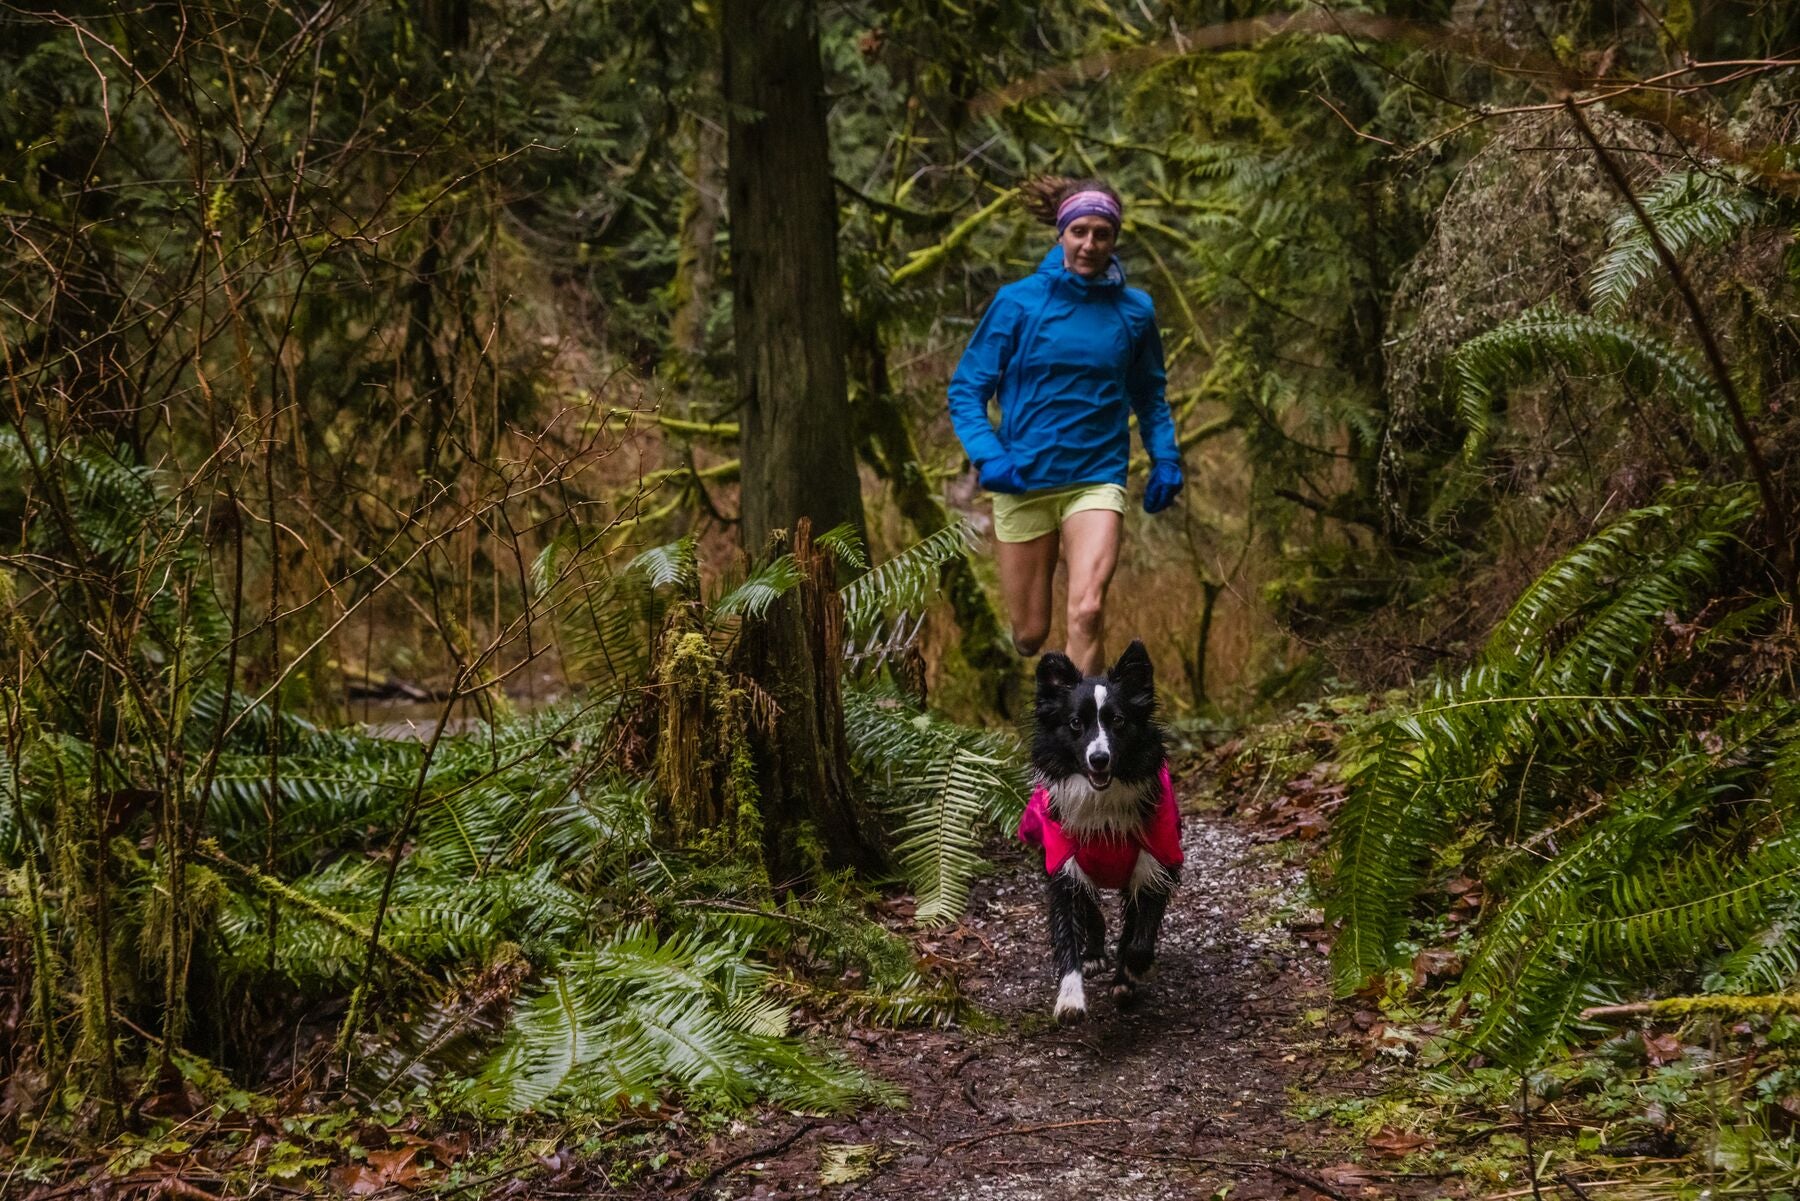 Krissy trail runs with dog PD in rain jacket through damp forest.